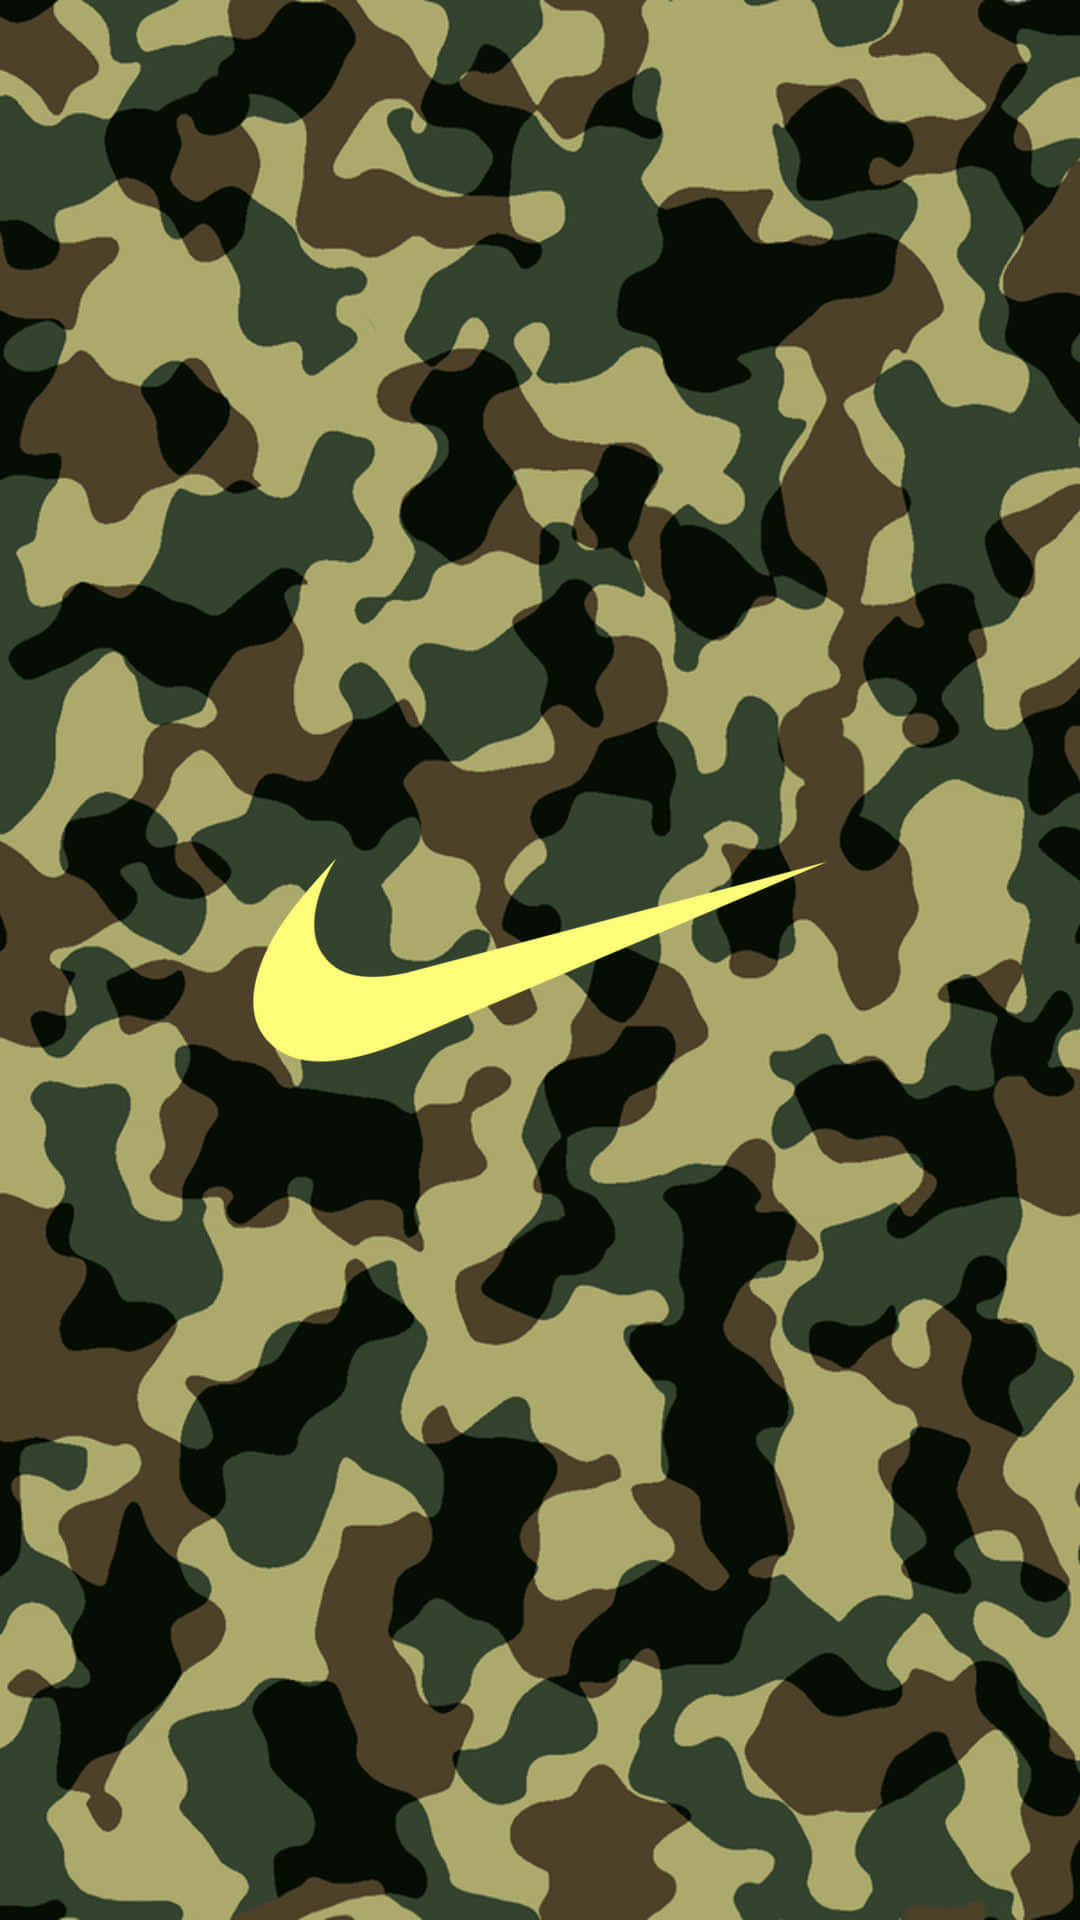 Feel the Style with Bape Camo Wallpaper